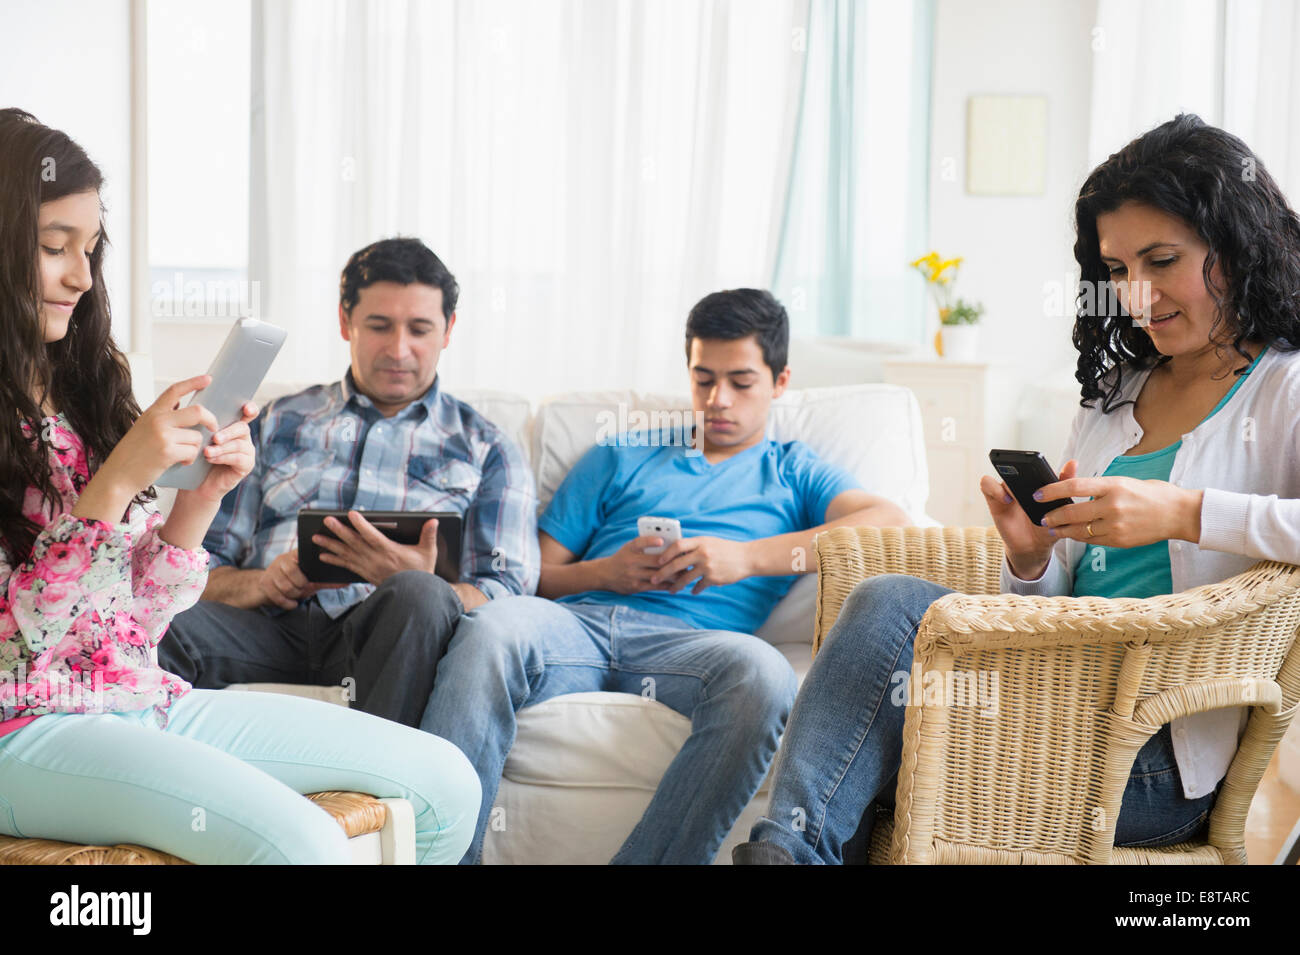 Hispanic family using cell phones and digital tablets in living room Stock Photo